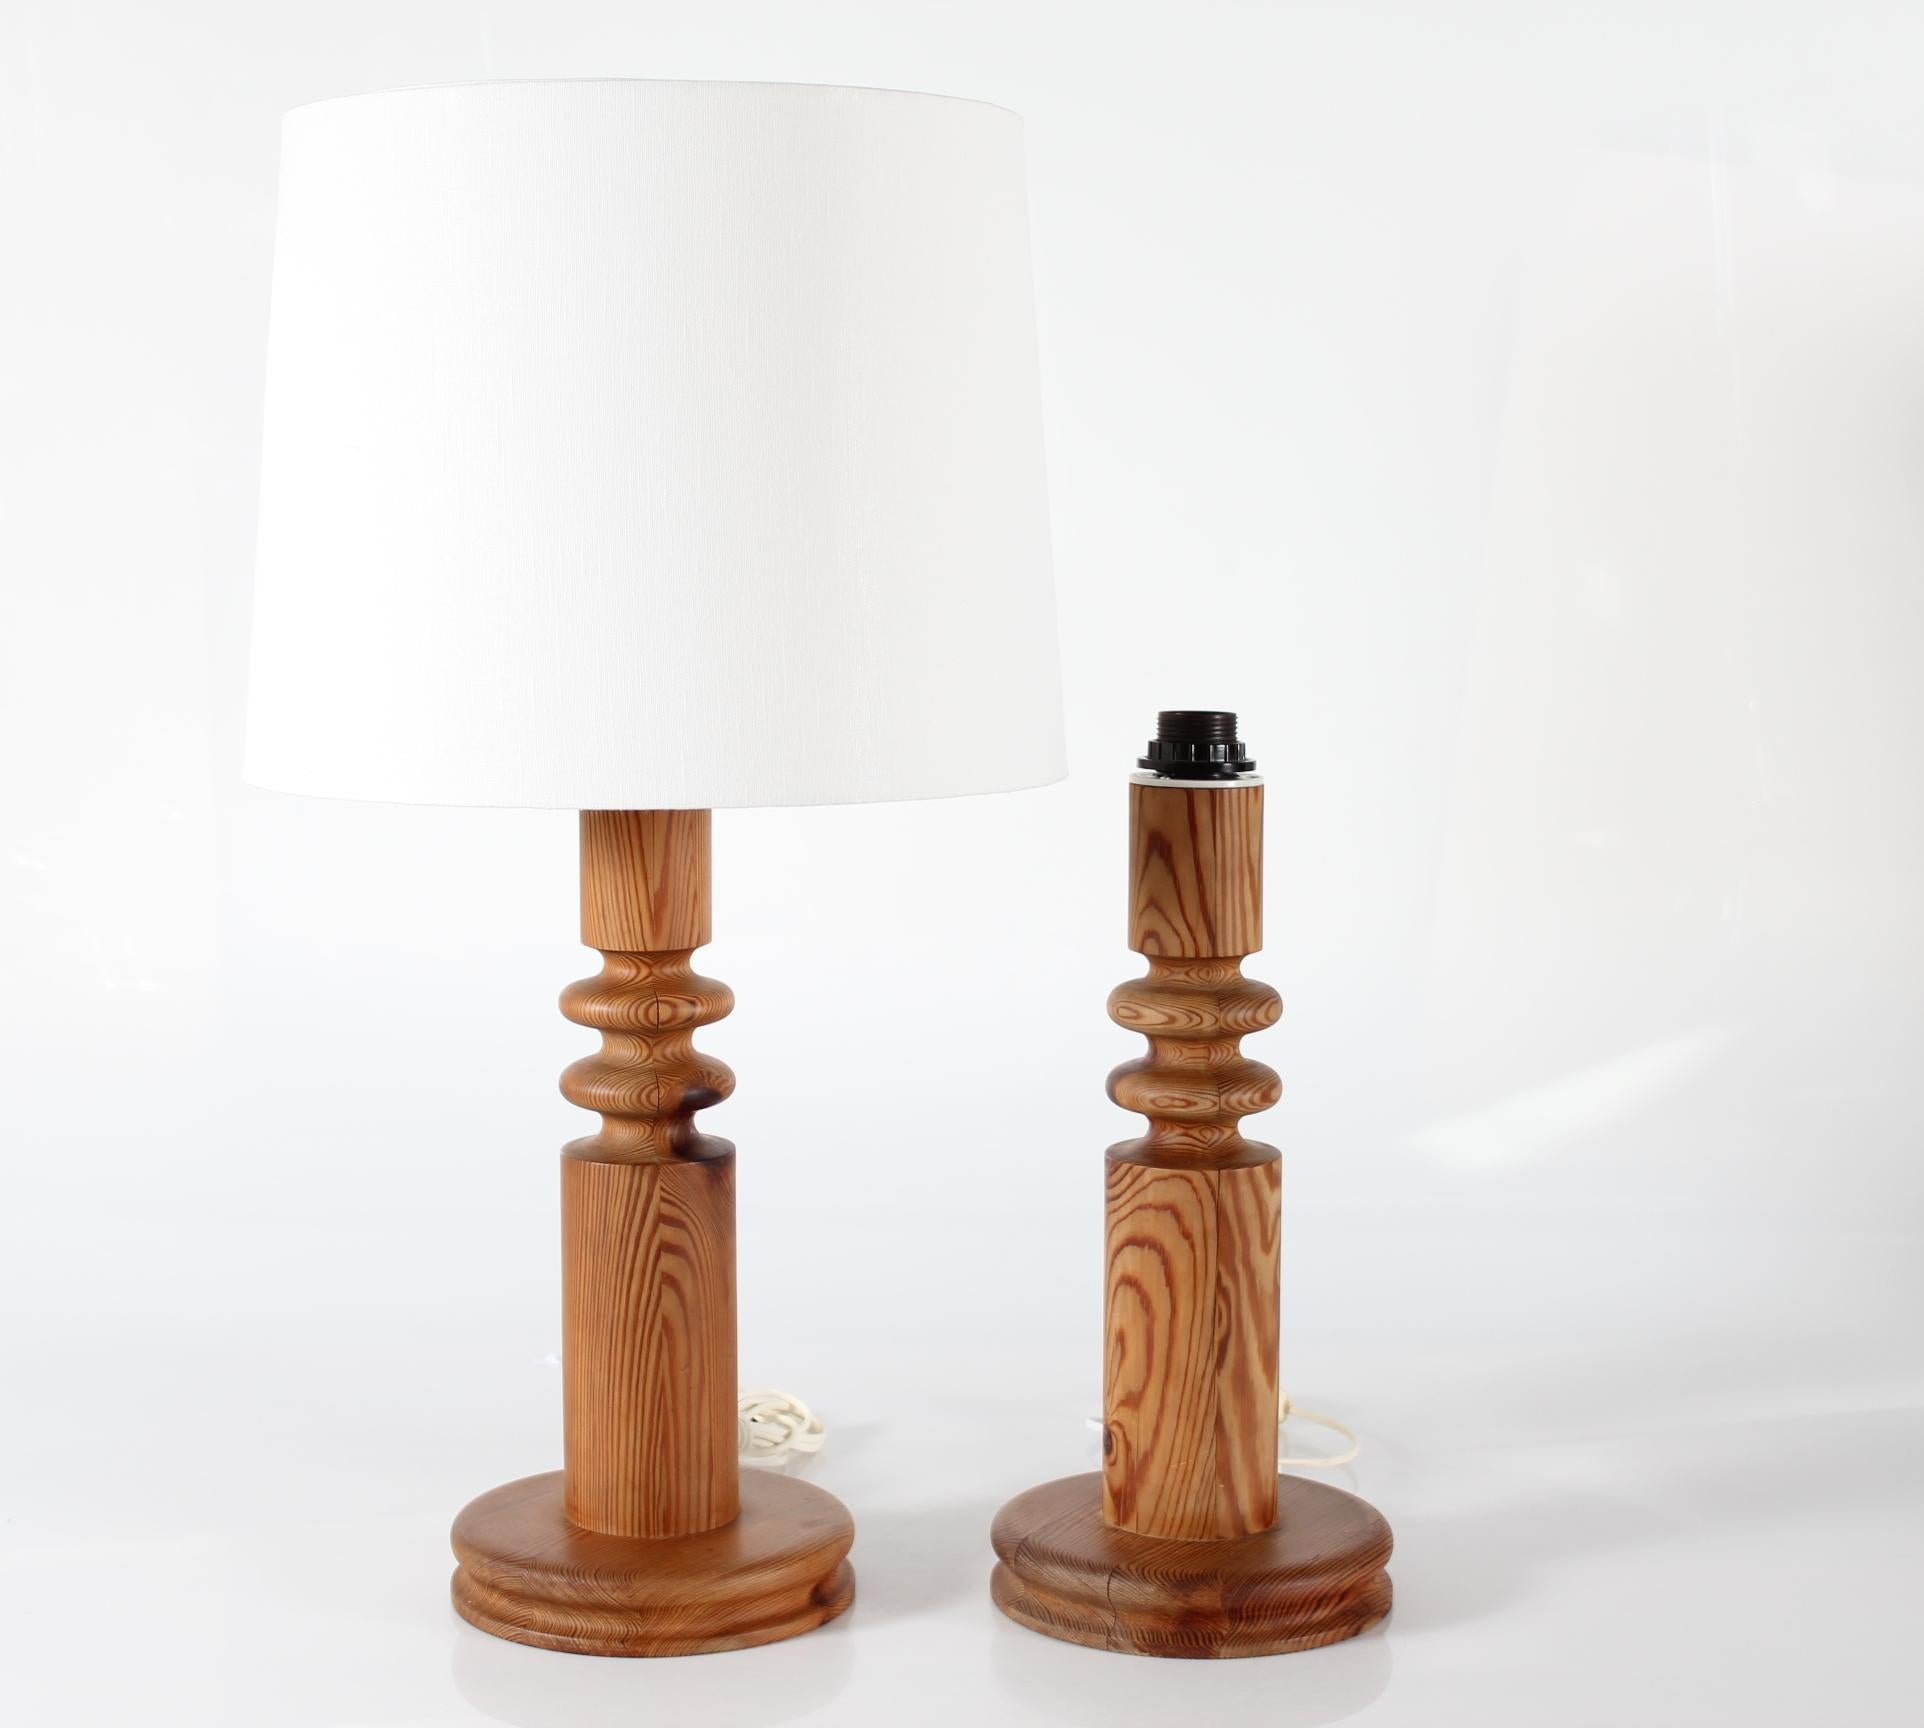 A pair of tall sculptural Uno Kristiansson table lamps made of solid turned pine, Sweden 1970s. 

Measures: 
Height incl. lamp shade 71 cm
Height lamp base incl. socket 44 cm
Height lamp base wooden part only 41 cm
Diameter lampshade ca. 40